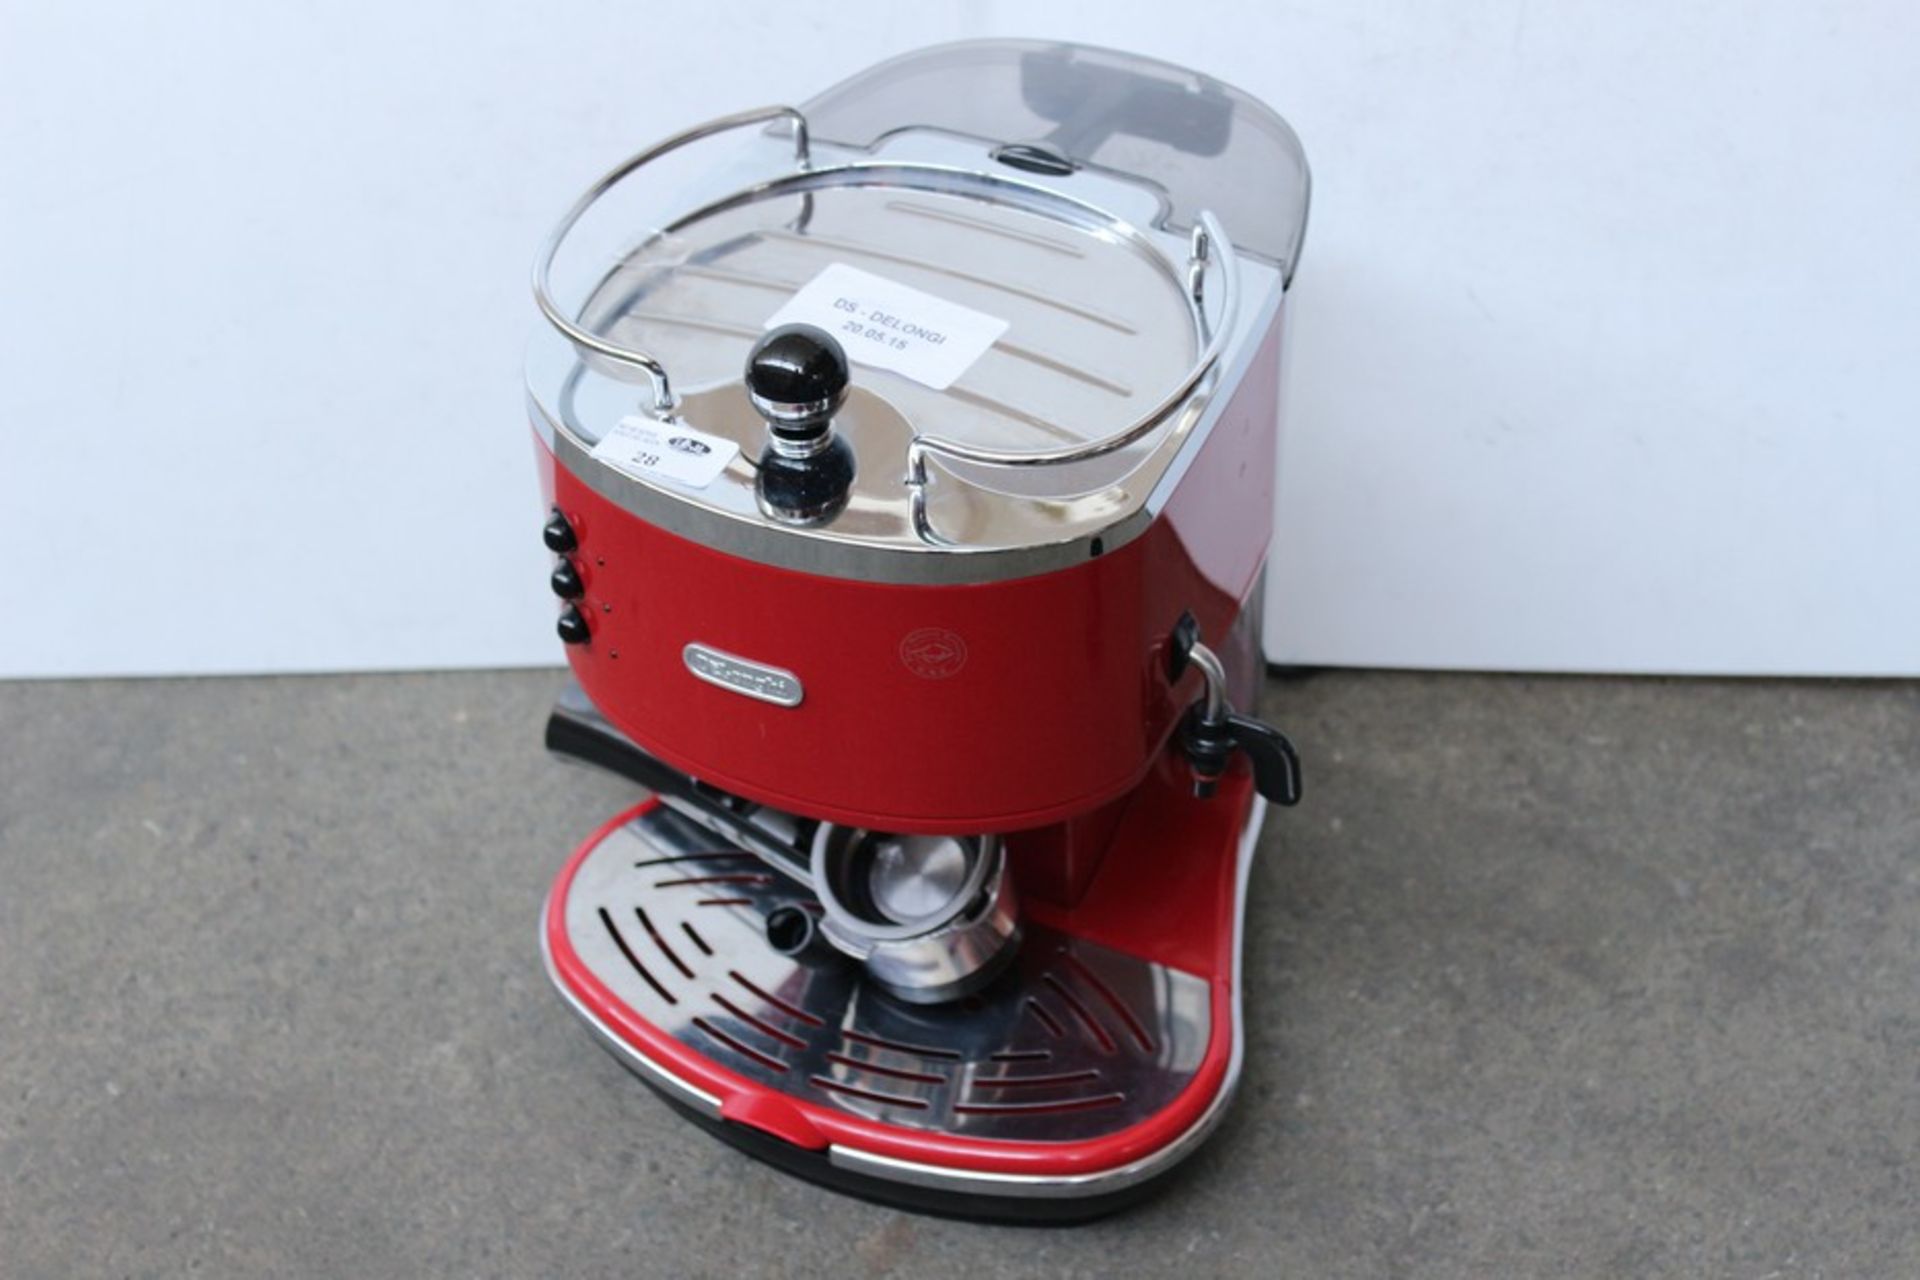 1 x DELONGHI ICONA 15 BAR CAPPUCCINO COFFEE MAKER   *PLEASE NOTE THAT THE BID PRICE IS MULTIPLIED BY